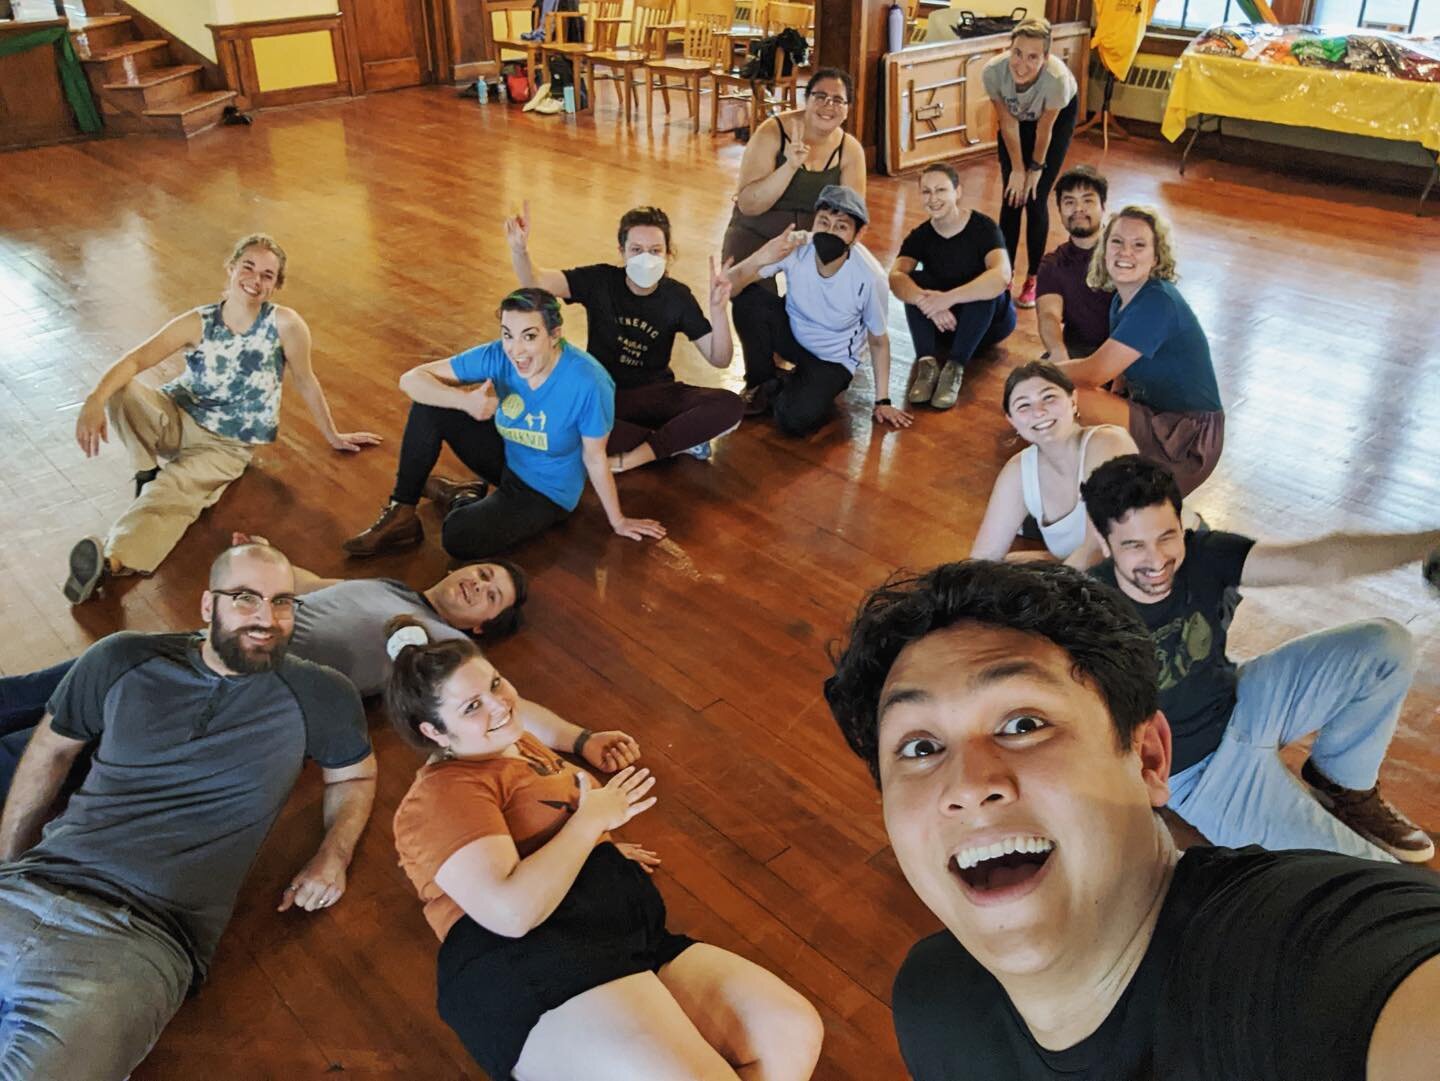 Thank you all SO MUCH for coming out and making our Big Apple workshop so much fun! We hope you all had as great a time as we did. Stay tuned for more workshops coming soon, and if you have feedback remember you can always send us a message here or t